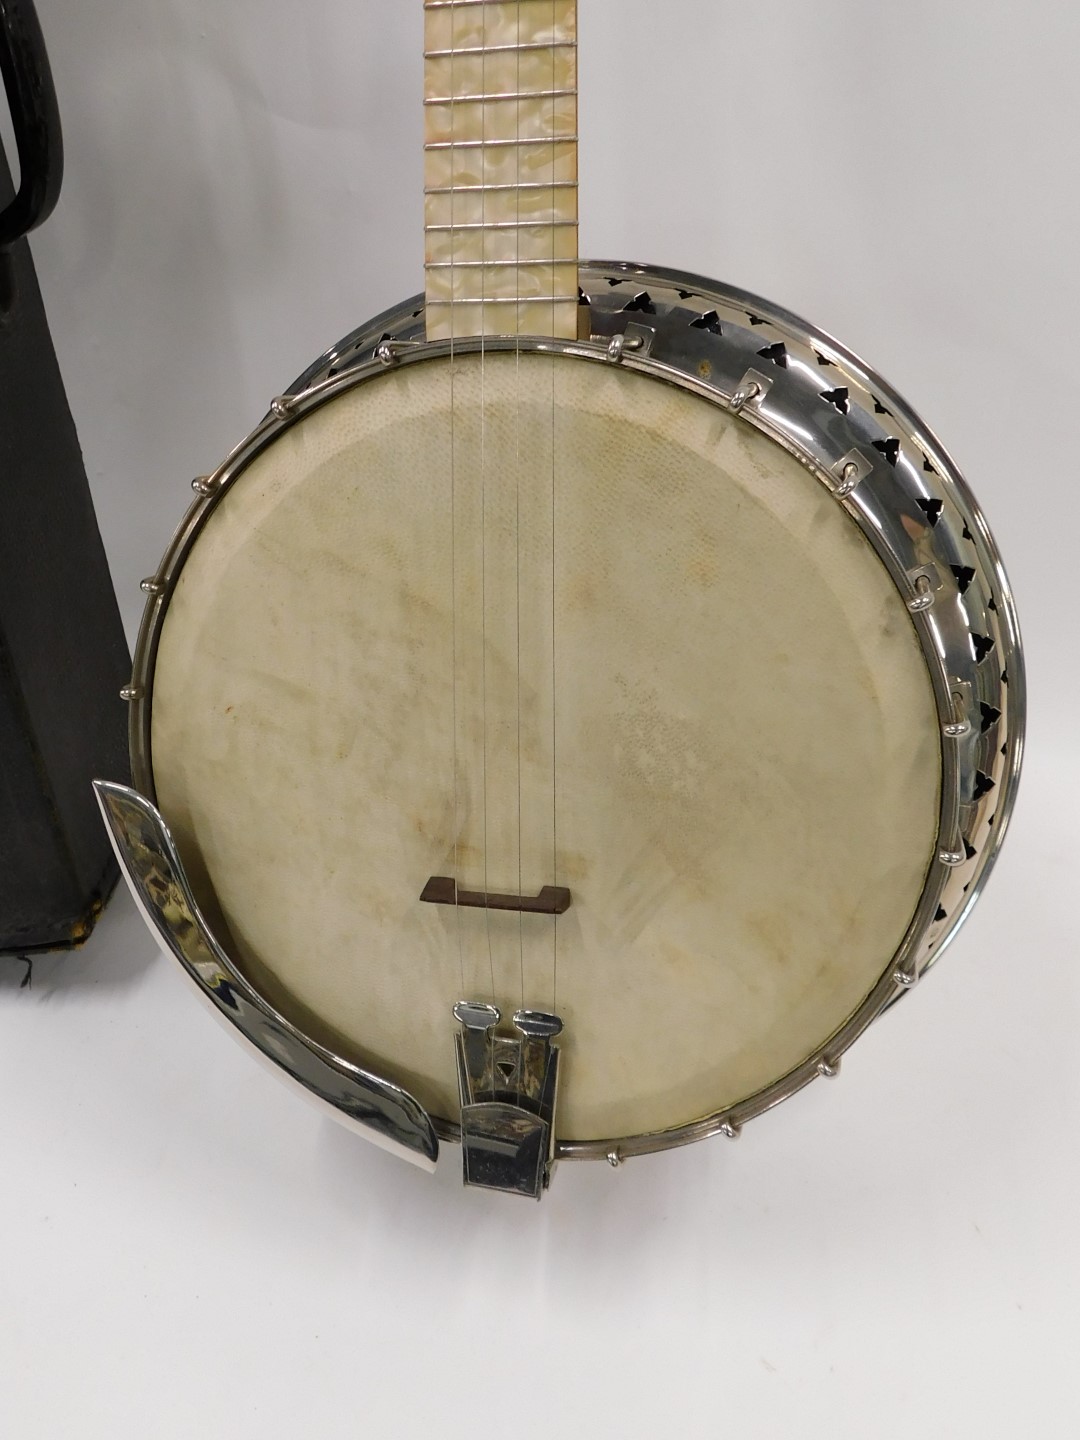 A B&S Master of London Ivory Queen banjo, with a simulated mother of pearl finger board, sides and b - Image 4 of 6